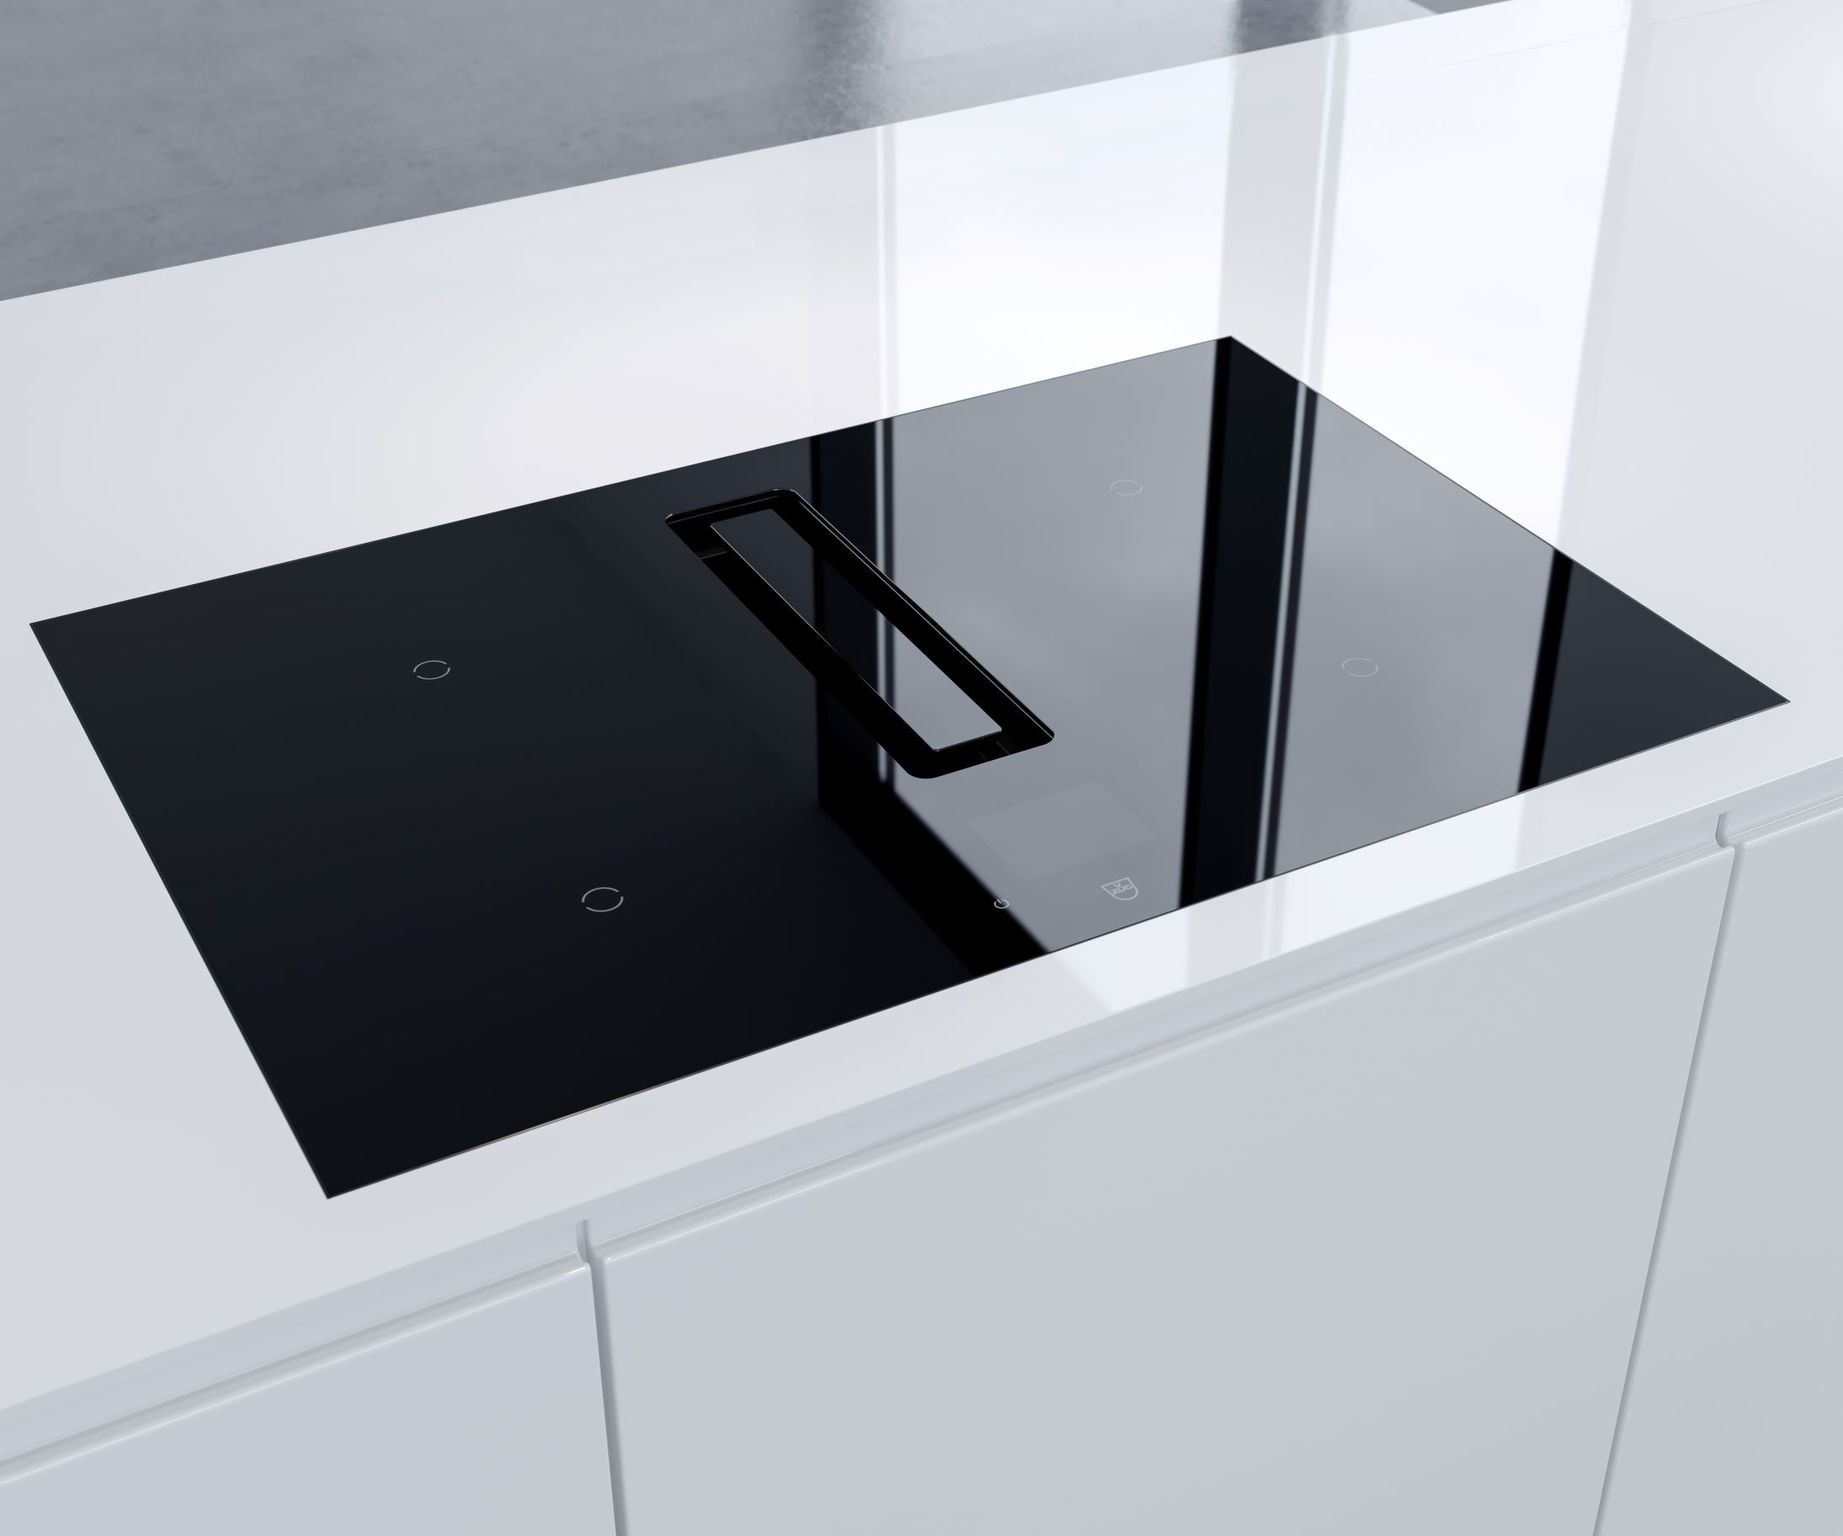 An ingenious combination: The new Fusion hob